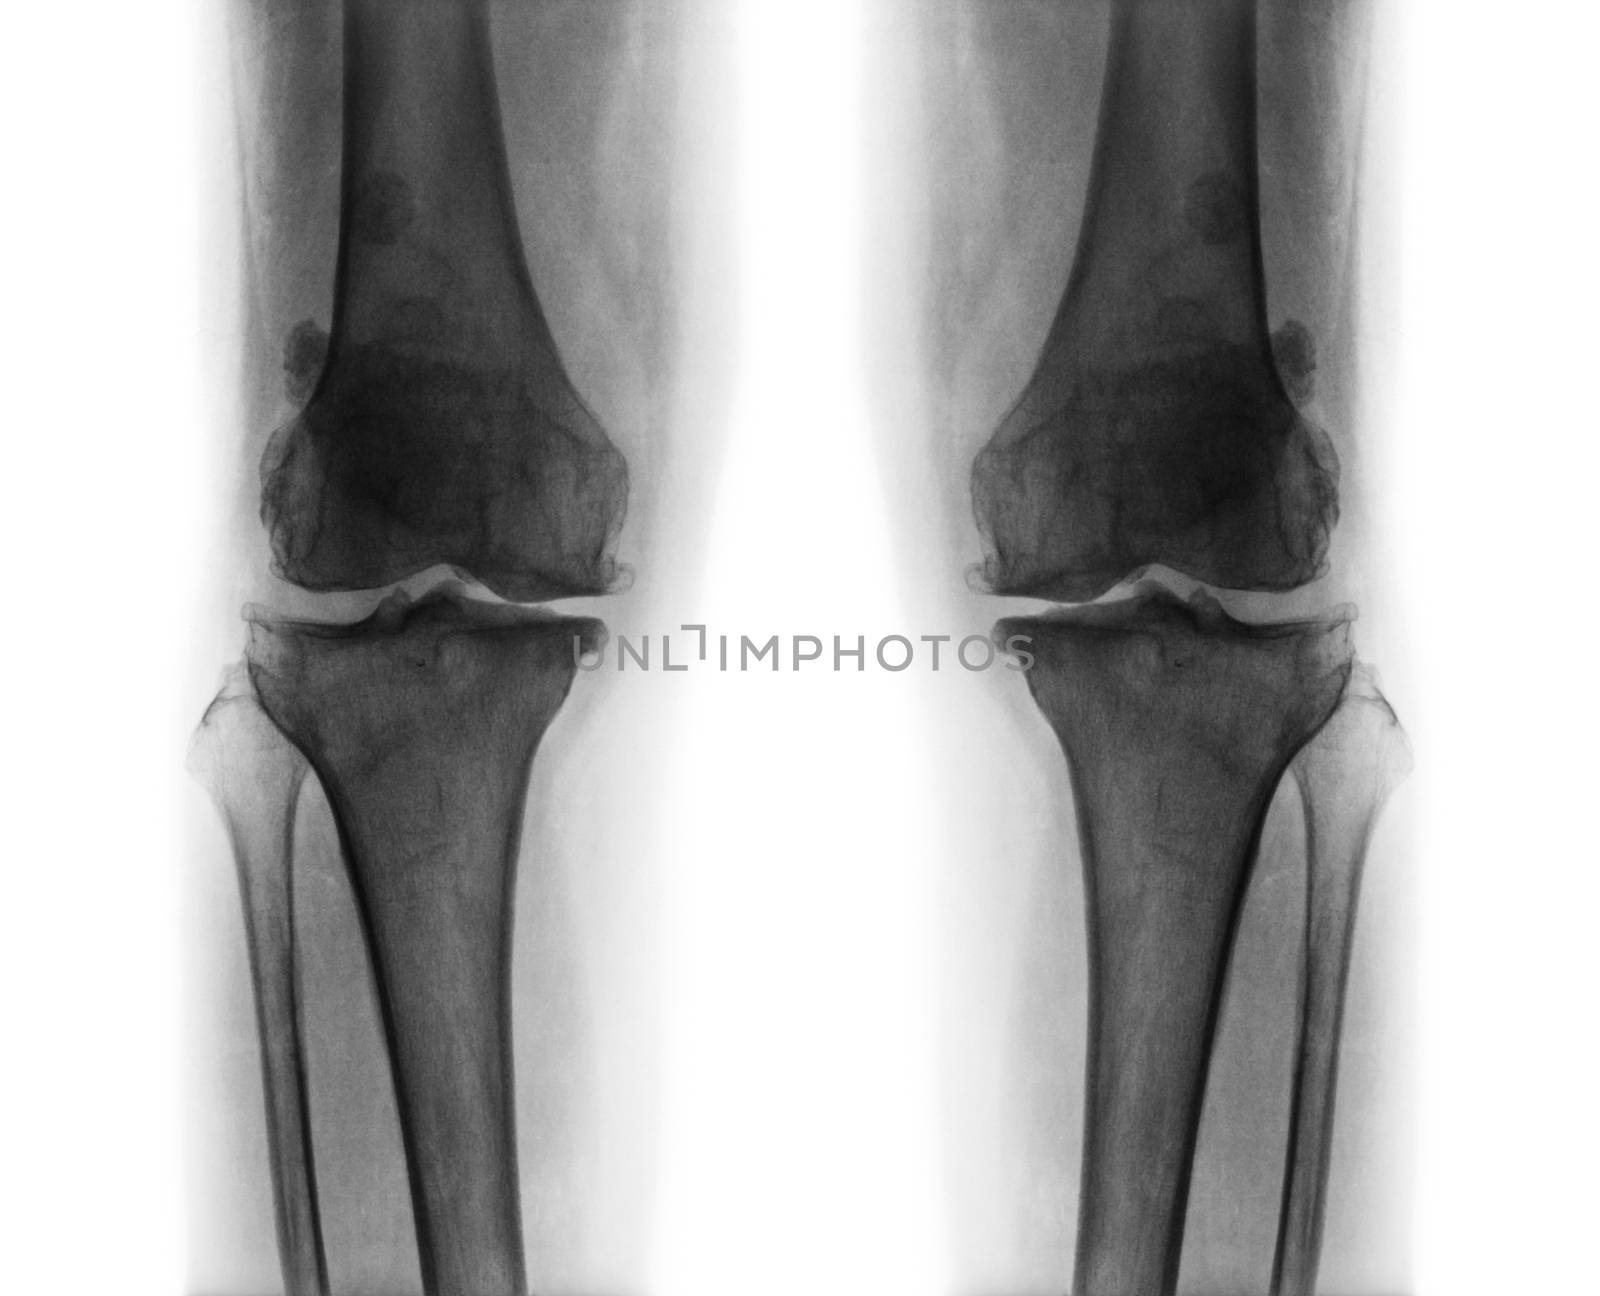 Osteoarthritis both knee . film x-ray AP ( anterior - posterior ) of knee show narrow joint space . osteophyte ( spur ) . subcondral sclerosis .